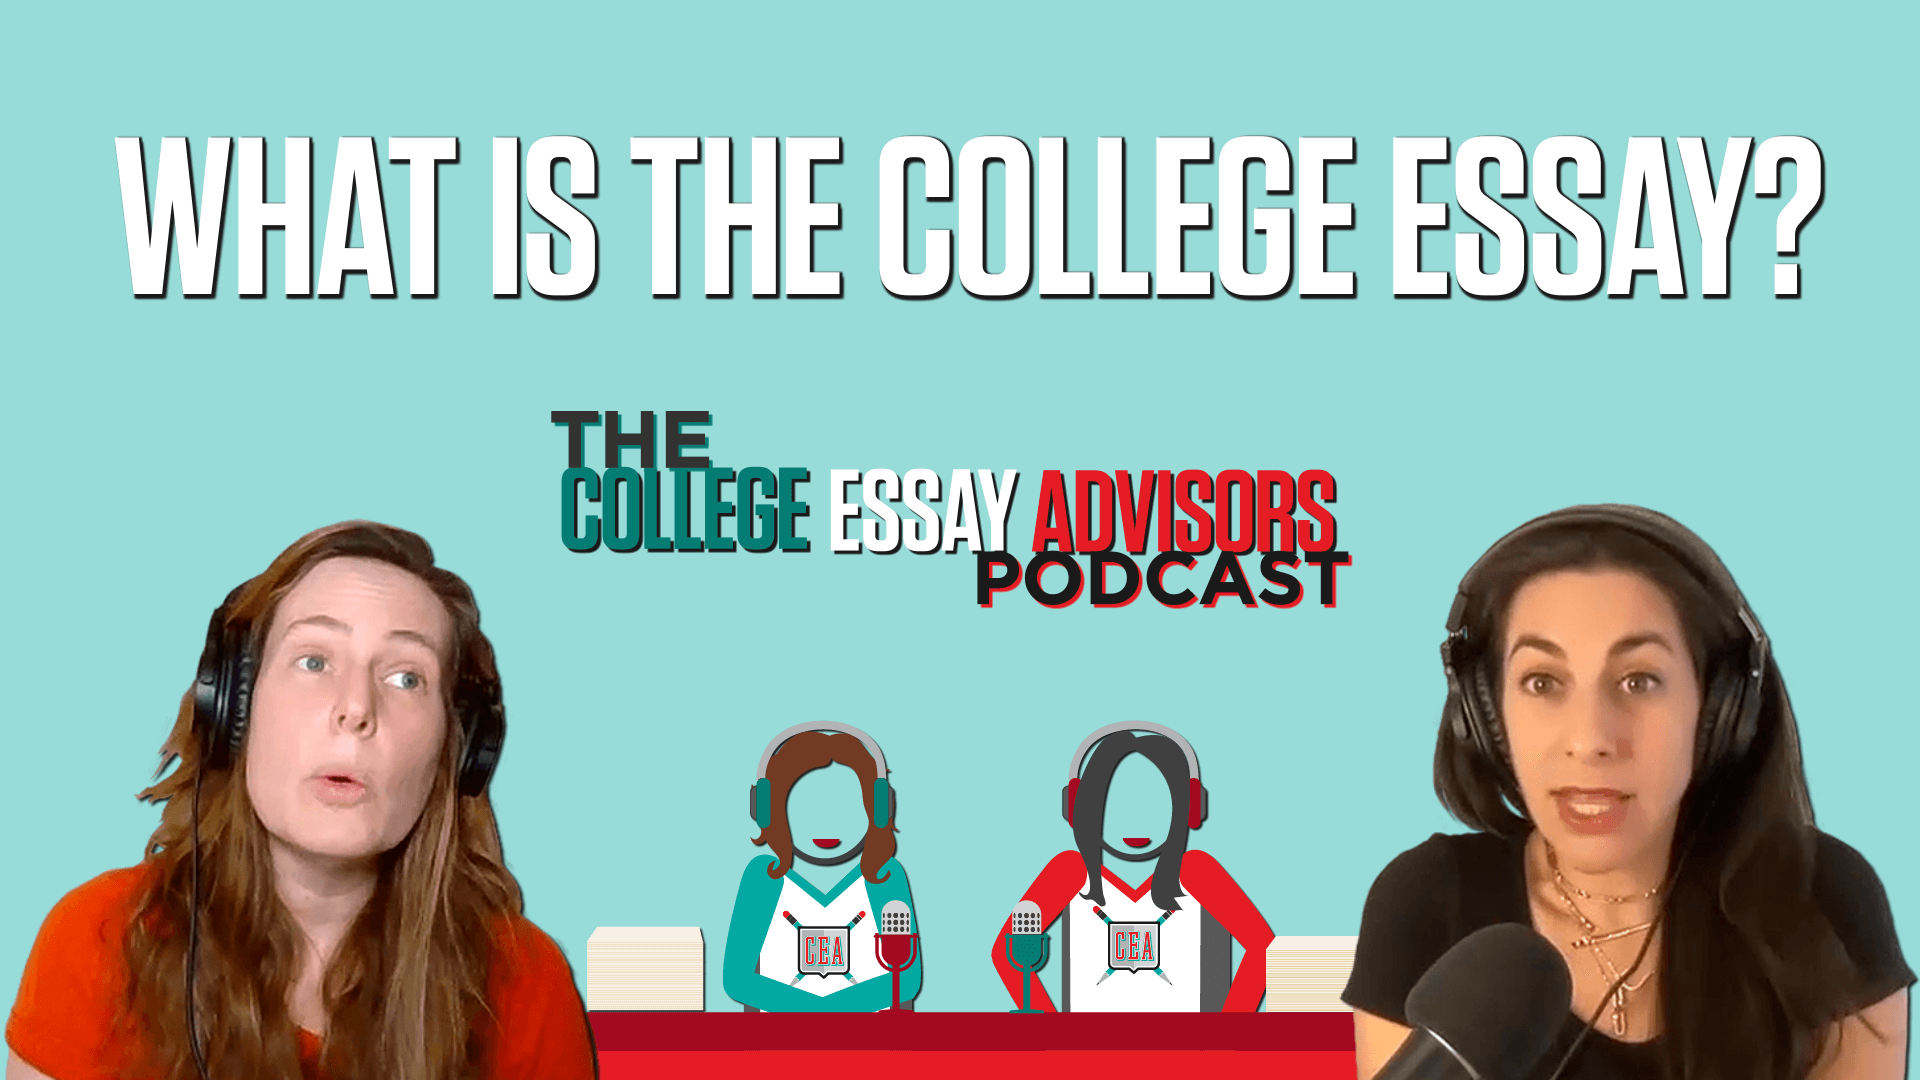 Episode 1: What is the College Essay?